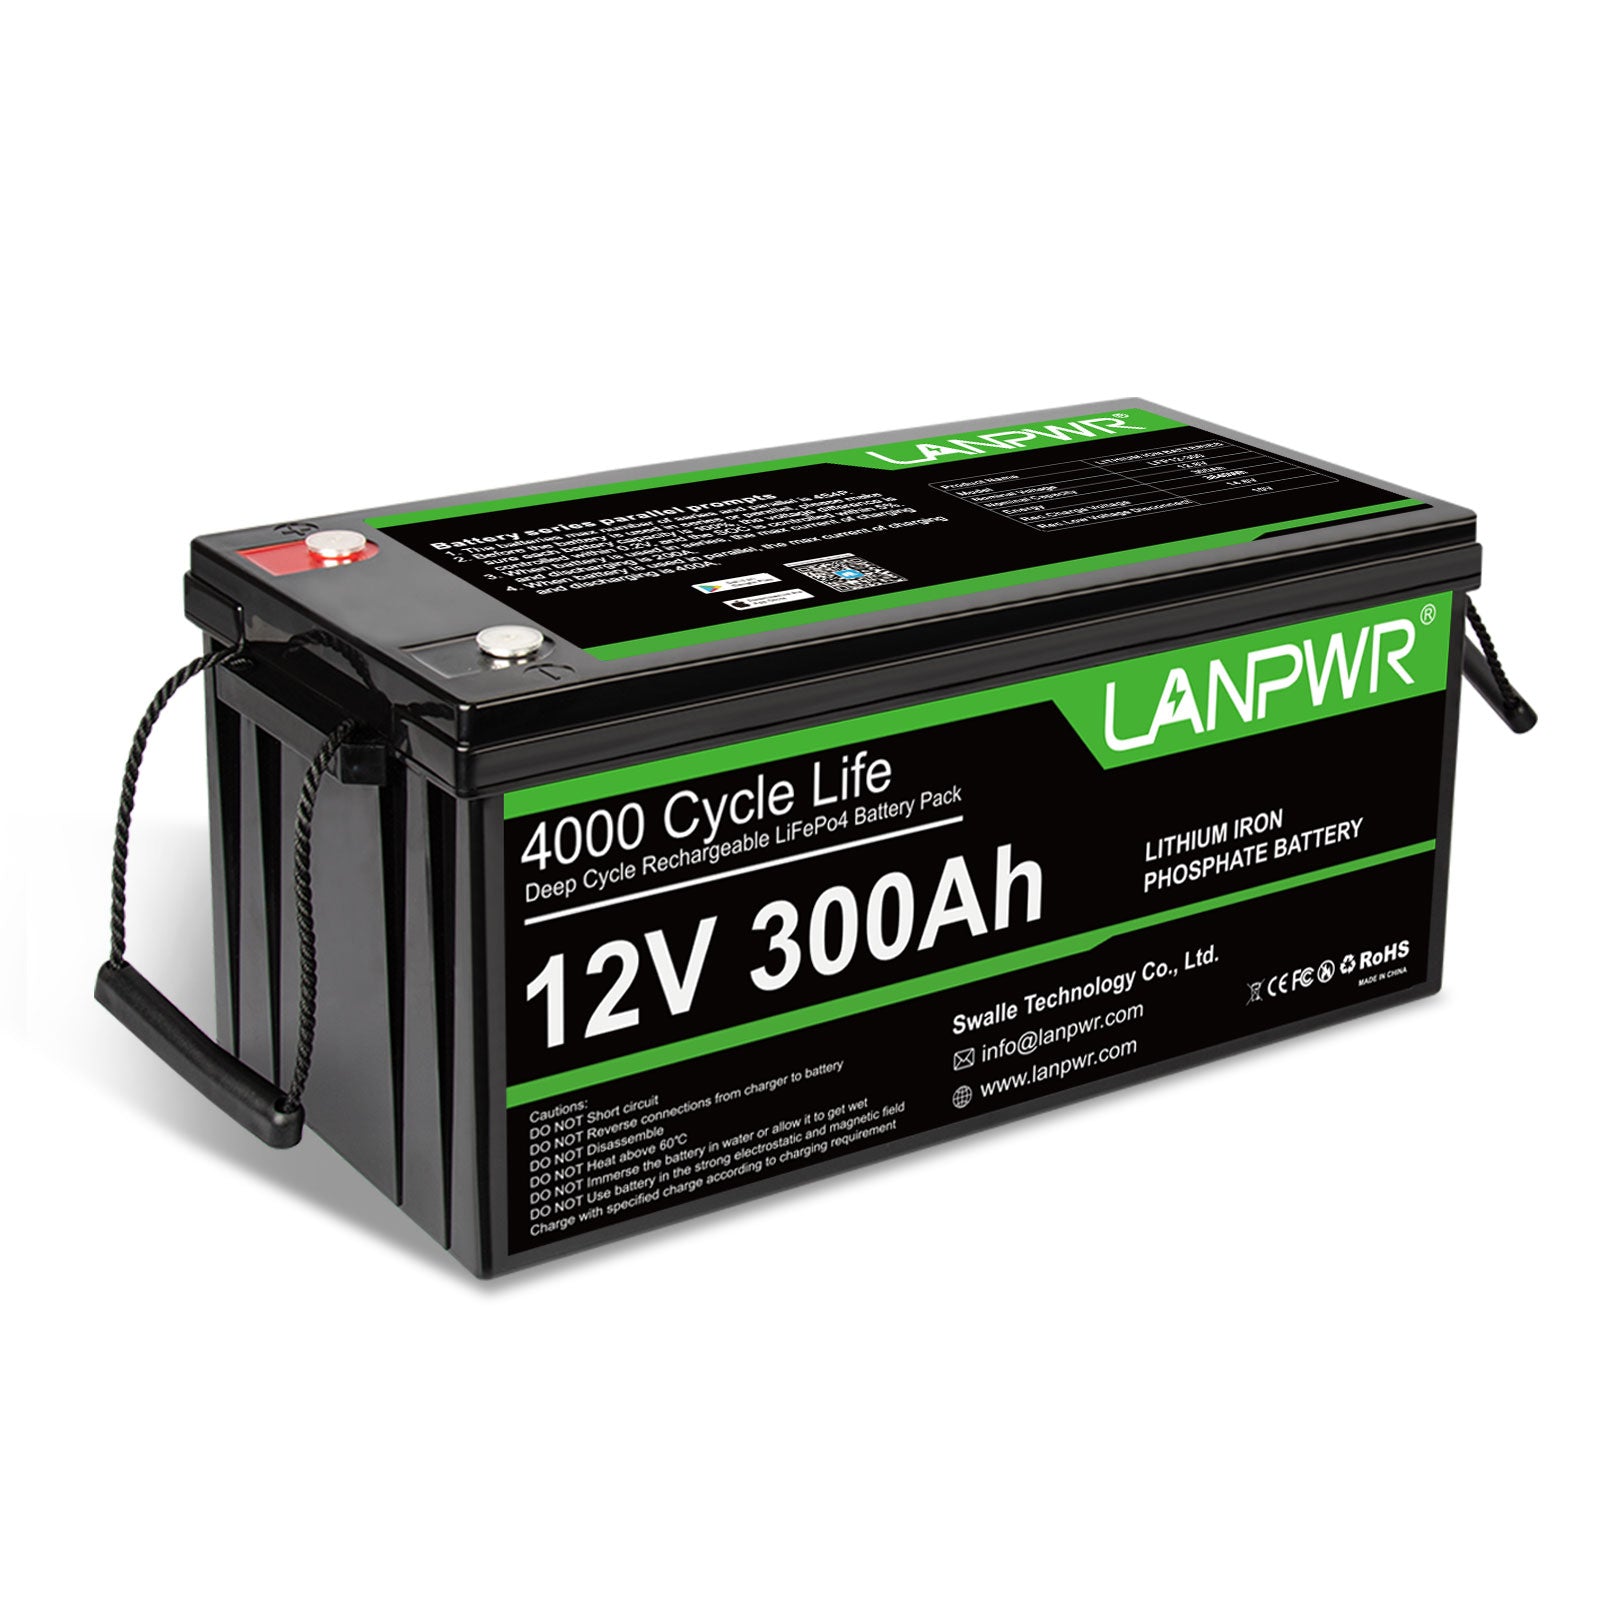 LANPWR 12V 300Ah LiFePO4 Battery with Bluetooth 5.0, Maximum Load Power 2560W, 3840Wh Energy